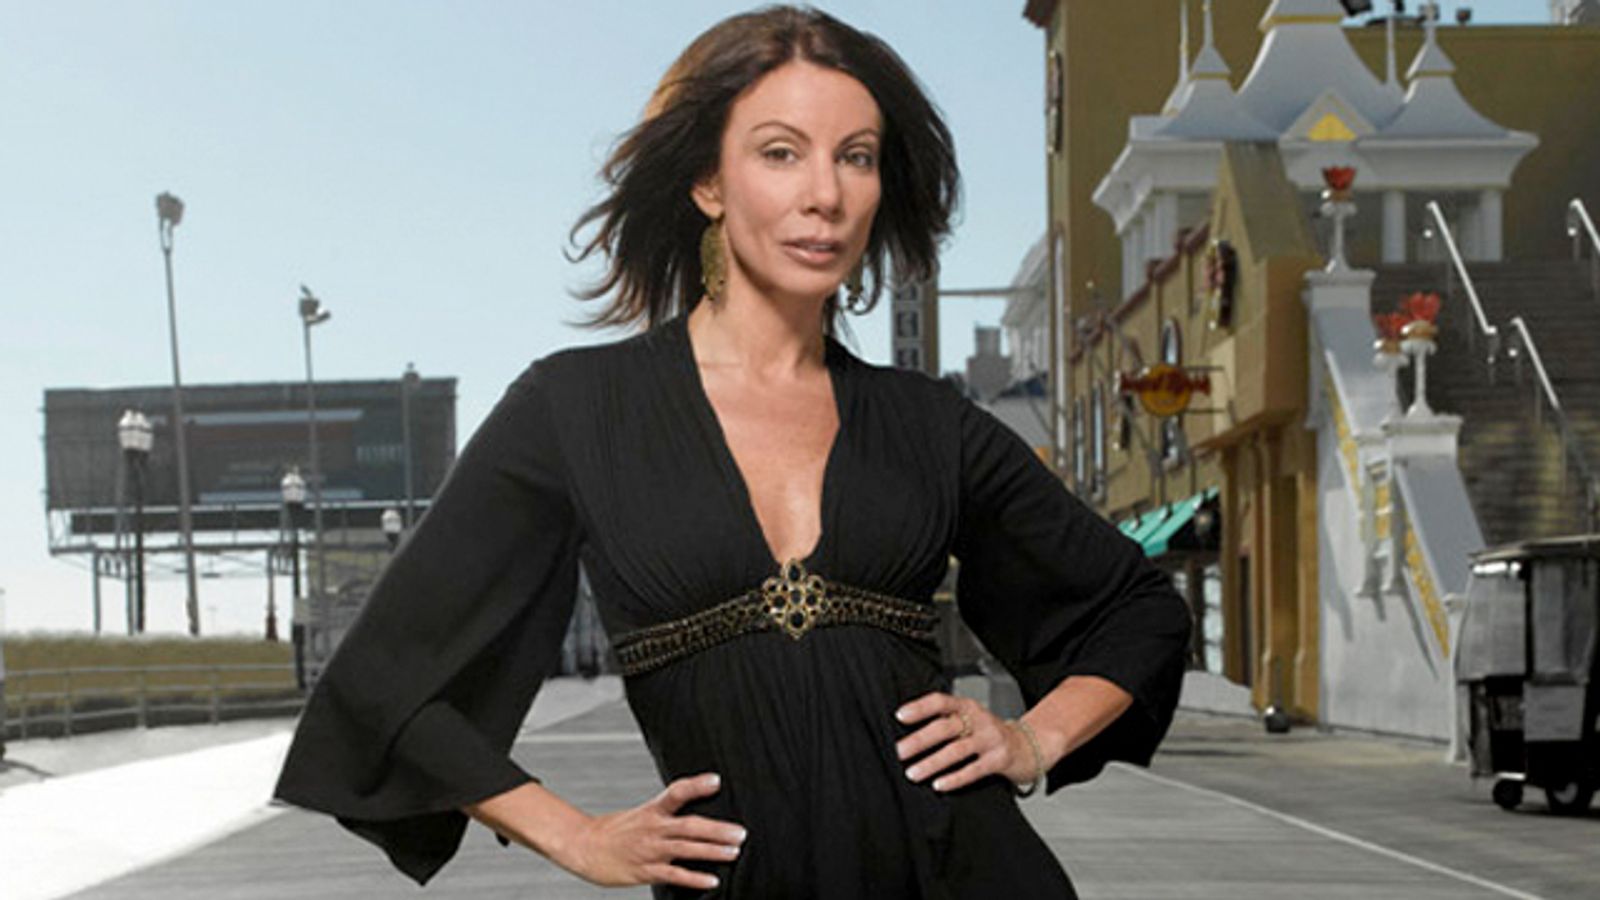 Reel Wife: Judge Torpedoes Release of Danielle Staub's Sex Tape